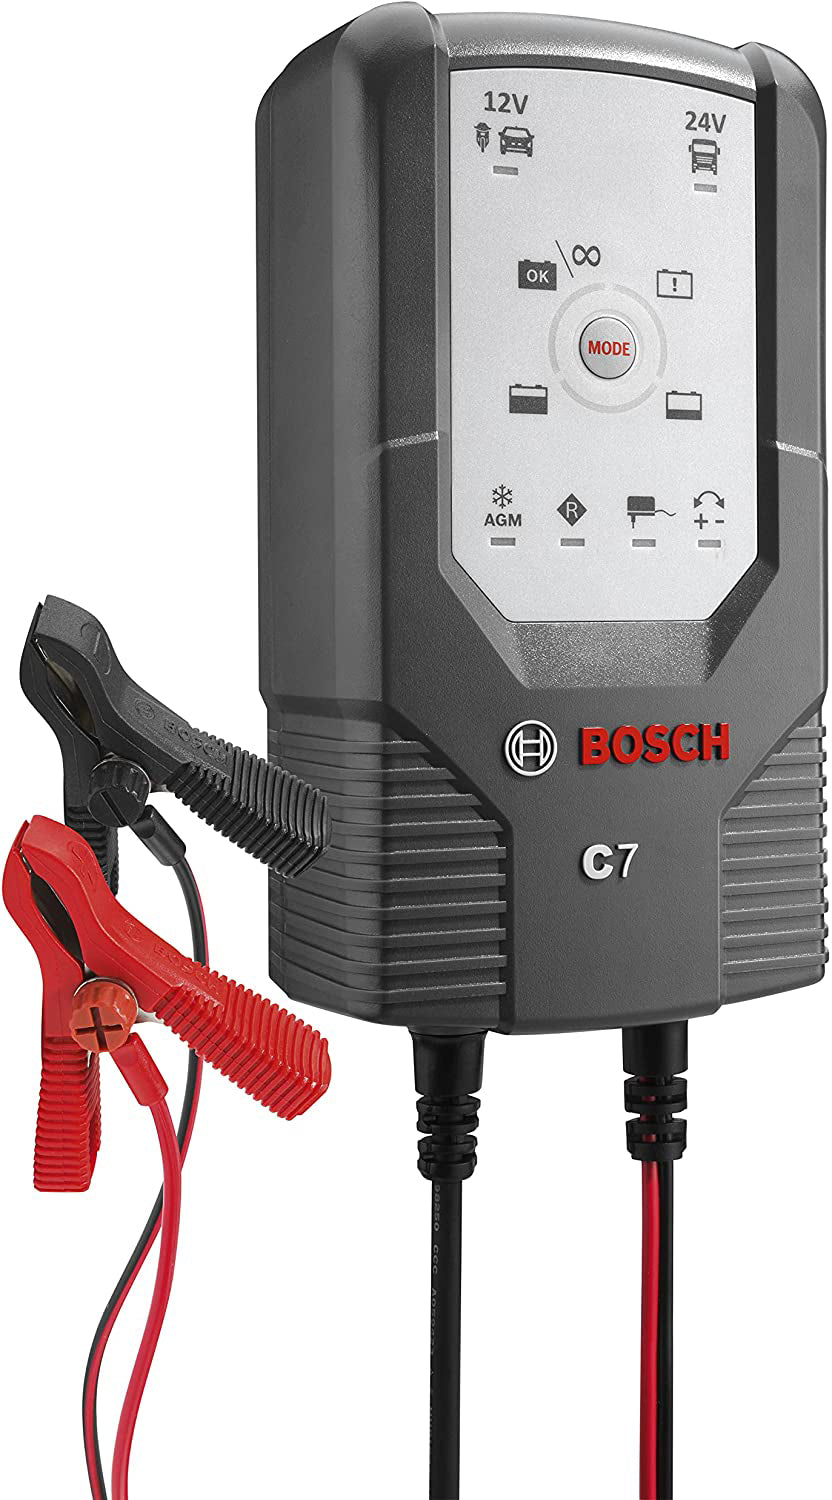 Bosch C3 and C7 Battery Chargers: Smart, safe and simple to use